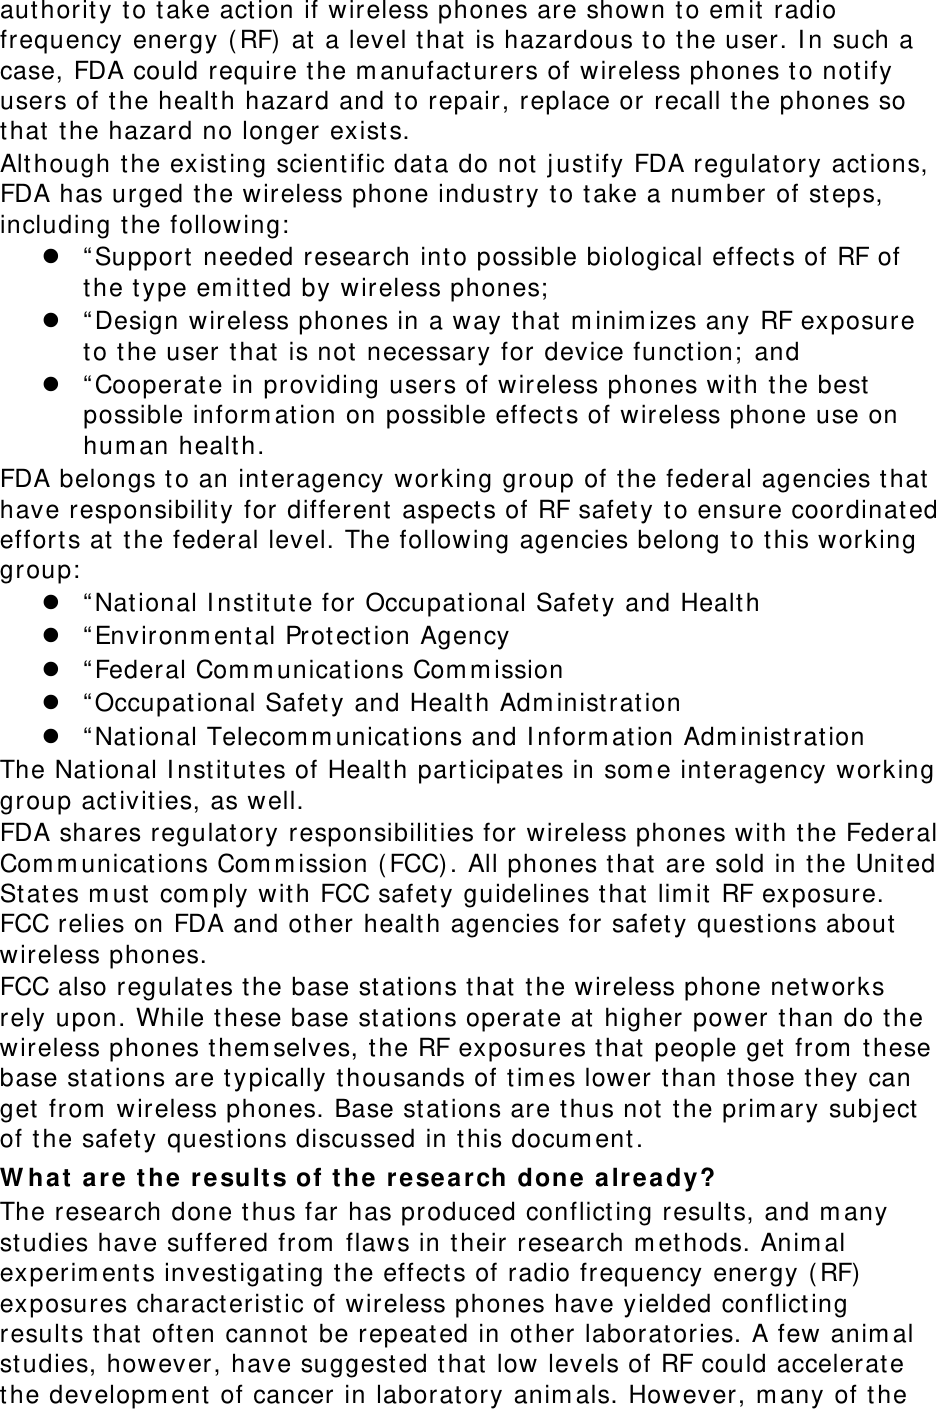 authority to take action if wireless phones are shown to emit radio frequency energy (RF) at a level that is hazardous to the user. In such a case, FDA could require the manufacturers of wireless phones to notify users of the health hazard and to repair, replace or recall the phones so that the hazard no longer exists. Although the existing scientific data do not justify FDA regulatory actions, FDA has urged the wireless phone industry to take a number of steps, including the following: z “Support needed research into possible biological effects of RF of the type emitted by wireless phones; z “Design wireless phones in a way that minimizes any RF exposure to the user that is not necessary for device function; and z “Cooperate in providing users of wireless phones with the best possible information on possible effects of wireless phone use on human health. FDA belongs to an interagency working group of the federal agencies that have responsibility for different aspects of RF safety to ensure coordinated efforts at the federal level. The following agencies belong to this working group: z “National Institute for Occupational Safety and Health z “Environmental Protection Agency z “Federal Communications Commission z “Occupational Safety and Health Administration z “National Telecommunications and Information Administration The National Institutes of Health participates in some interagency working group activities, as well. FDA shares regulatory responsibilities for wireless phones with the Federal Communications Commission (FCC). All phones that are sold in the United States must comply with FCC safety guidelines that limit RF exposure. FCC relies on FDA and other health agencies for safety questions about wireless phones. FCC also regulates the base stations that the wireless phone networks rely upon. While these base stations operate at higher power than do the wireless phones themselves, the RF exposures that people get from these base stations are typically thousands of times lower than those they can get from wireless phones. Base stations are thus not the primary subject of the safety questions discussed in this document. What are the results of the research done already? The research done thus far has produced conflicting results, and many studies have suffered from flaws in their research methods. Animal experiments investigating the effects of radio frequency energy (RF) exposures characteristic of wireless phones have yielded conflicting results that often cannot be repeated in other laboratories. A few animal studies, however, have suggested that low levels of RF could accelerate the development of cancer in laboratory animals. However, many of the 